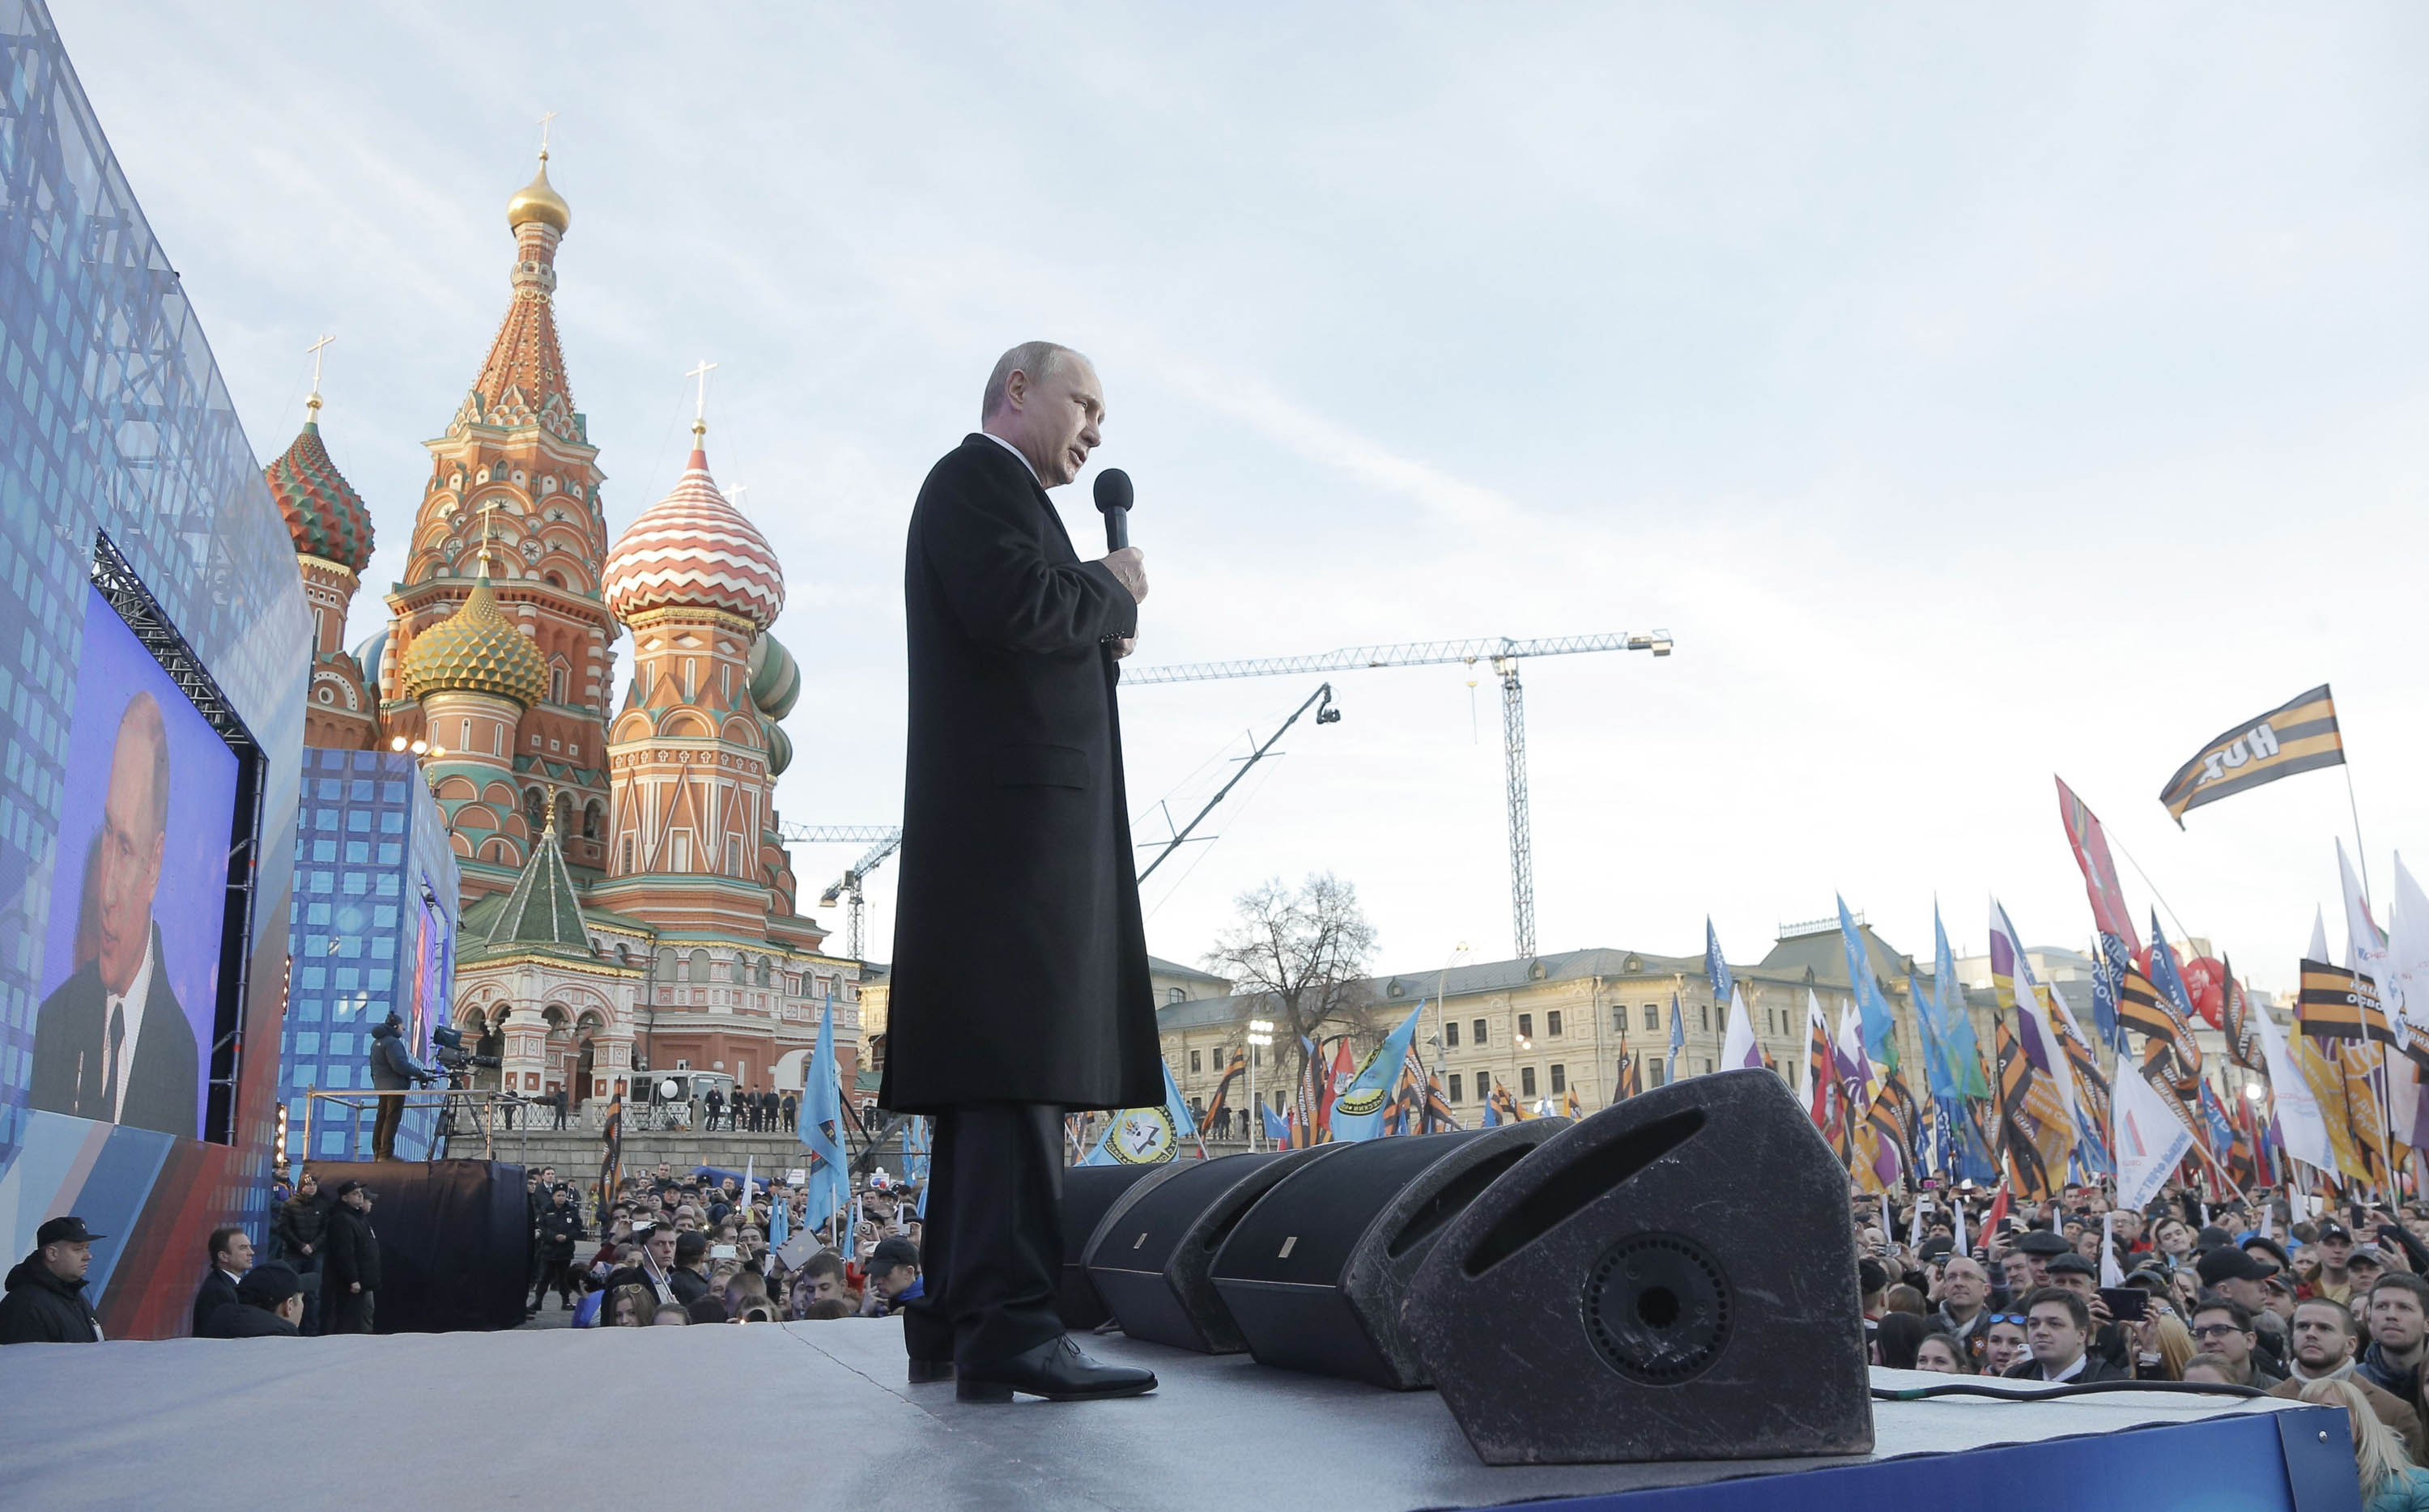 Putin speaks in Moscow in March at an event marking the first anniversary of the takeover of Crimea. (Maxim Shipenkov—The New York Times/Redux)